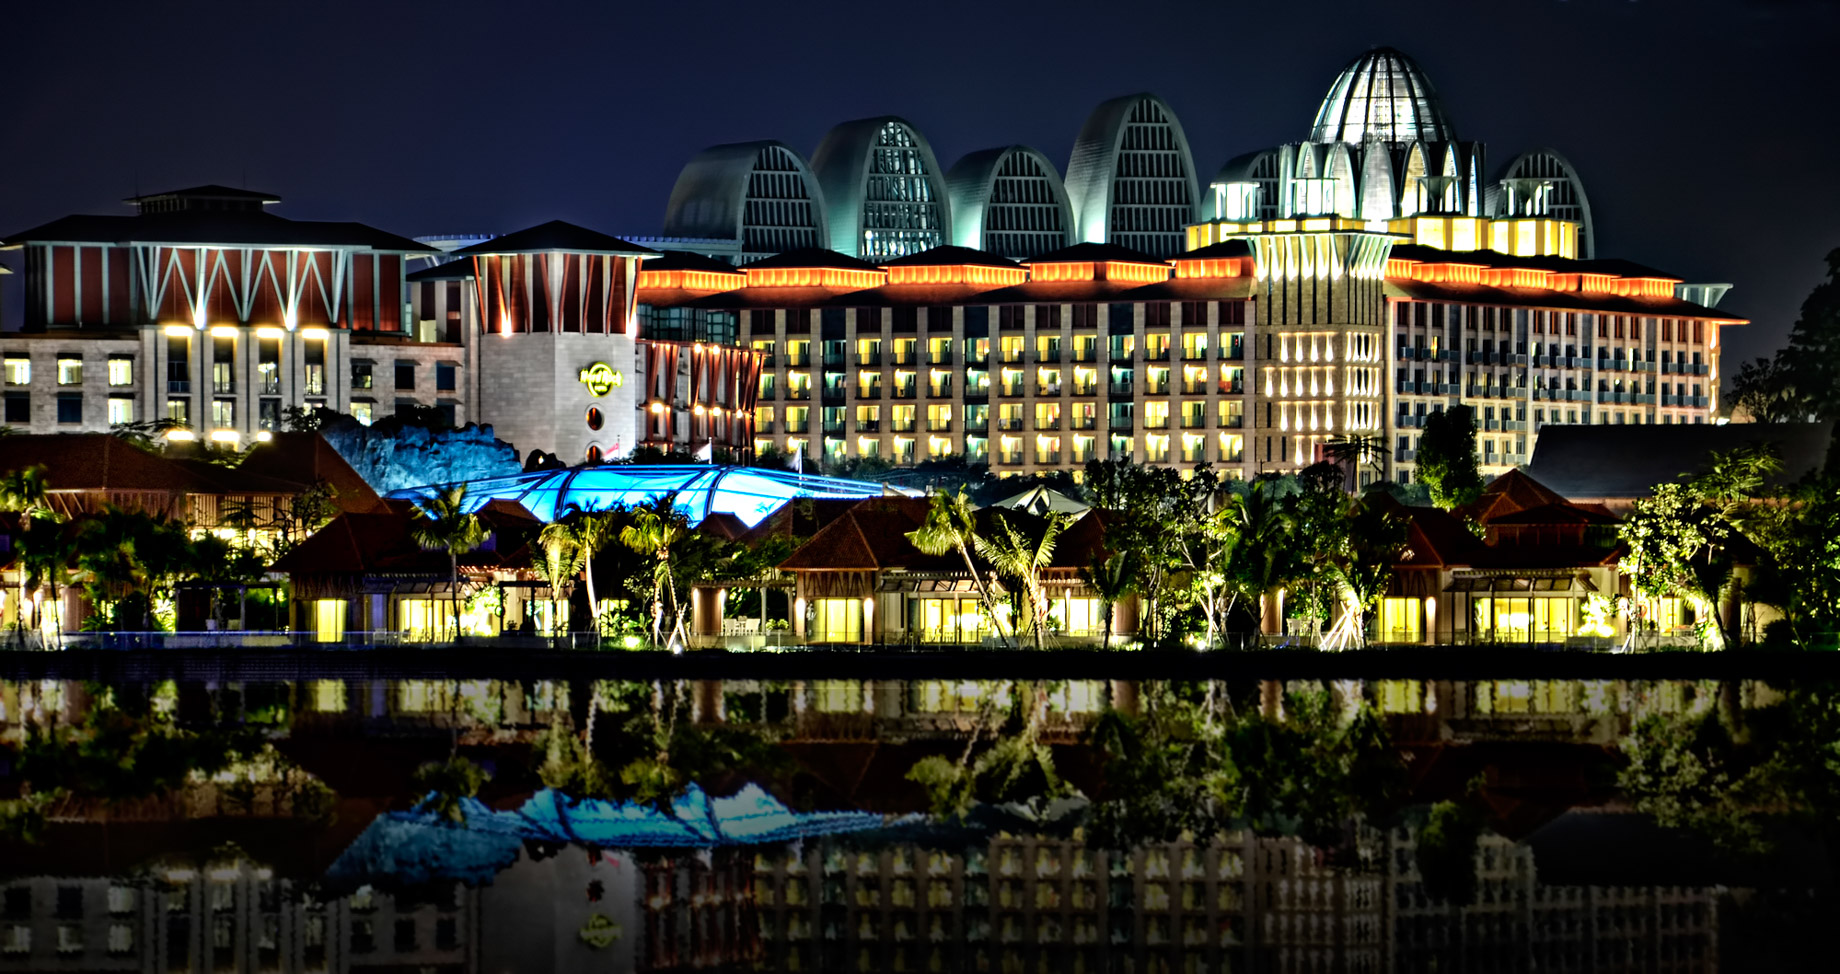 Resorts World Sentosa Singapore – Billion Dollar Buildings – The Most Expensive Casino Properties in the World